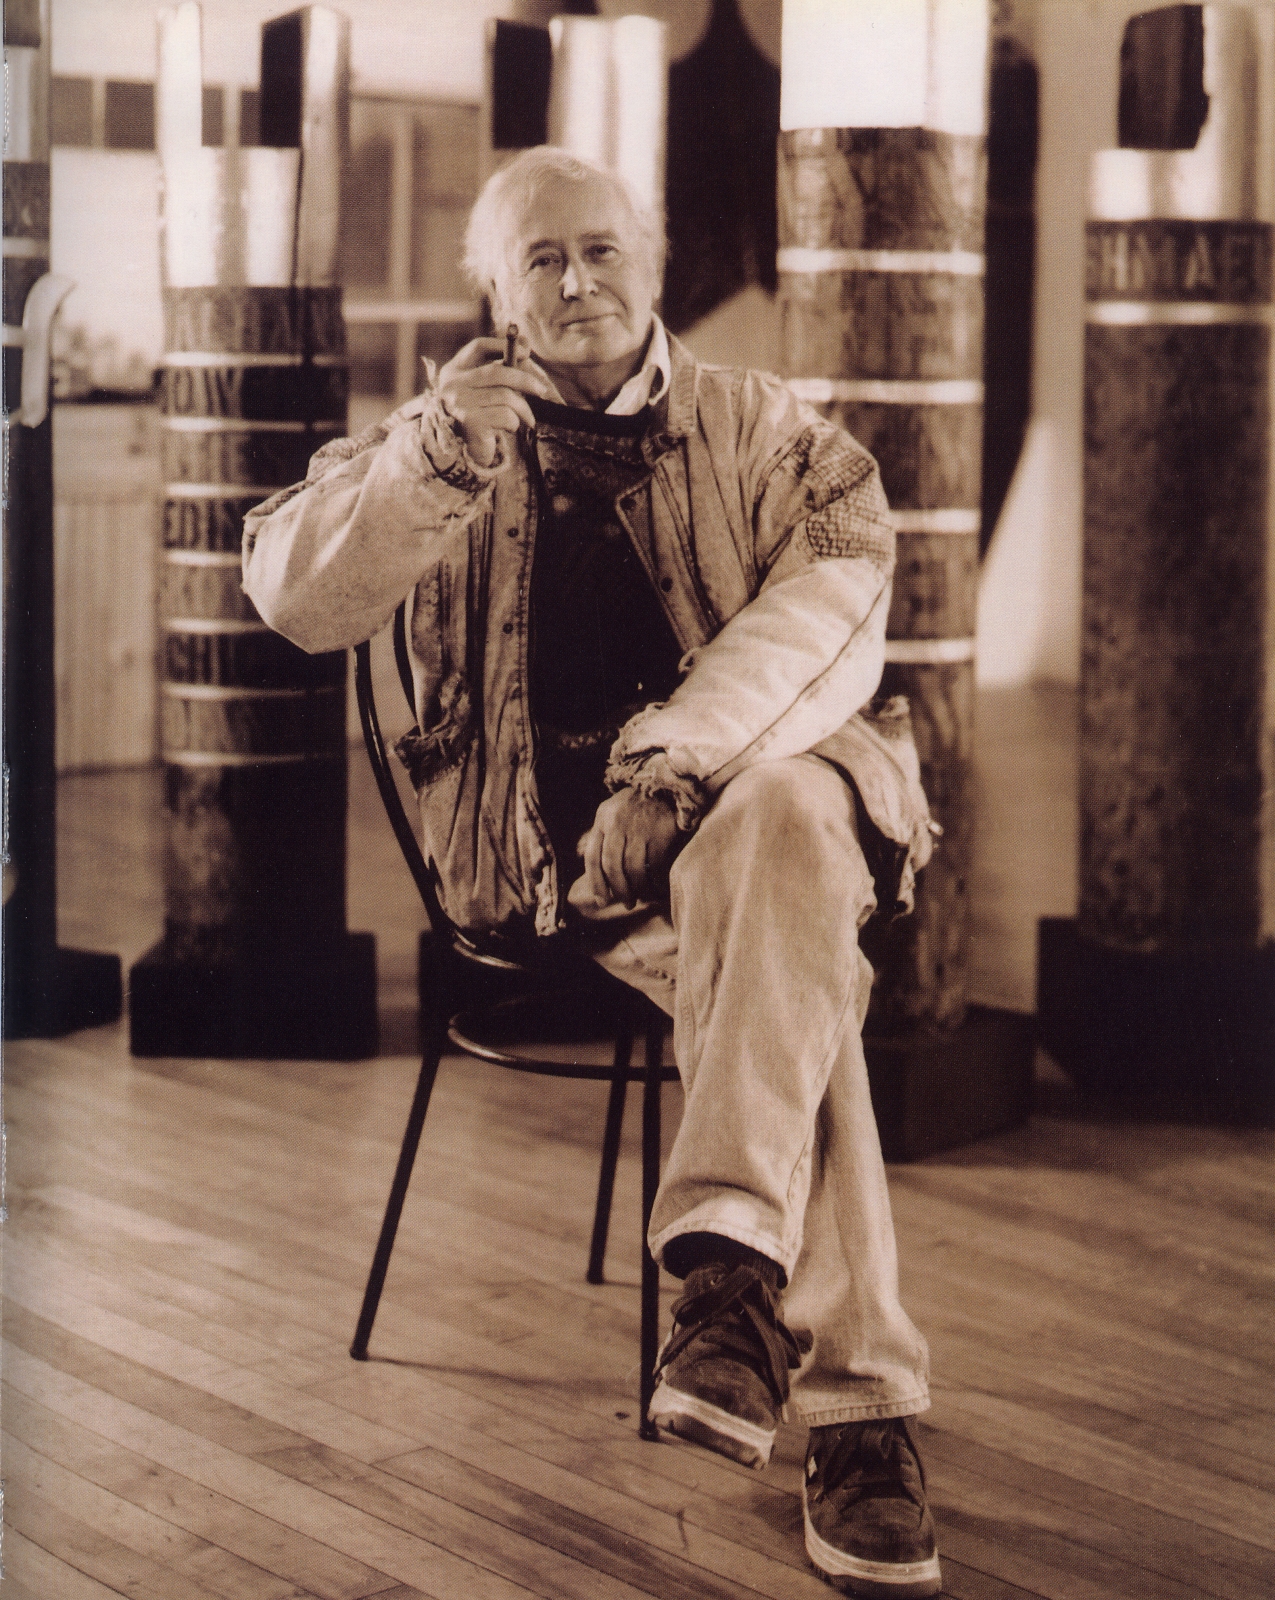 Robert Indiana in his studio, Vinalhaven, Maine. Photo: Dennis and Diana Griggs. Image courtesy of Dennis and Diana Griggs